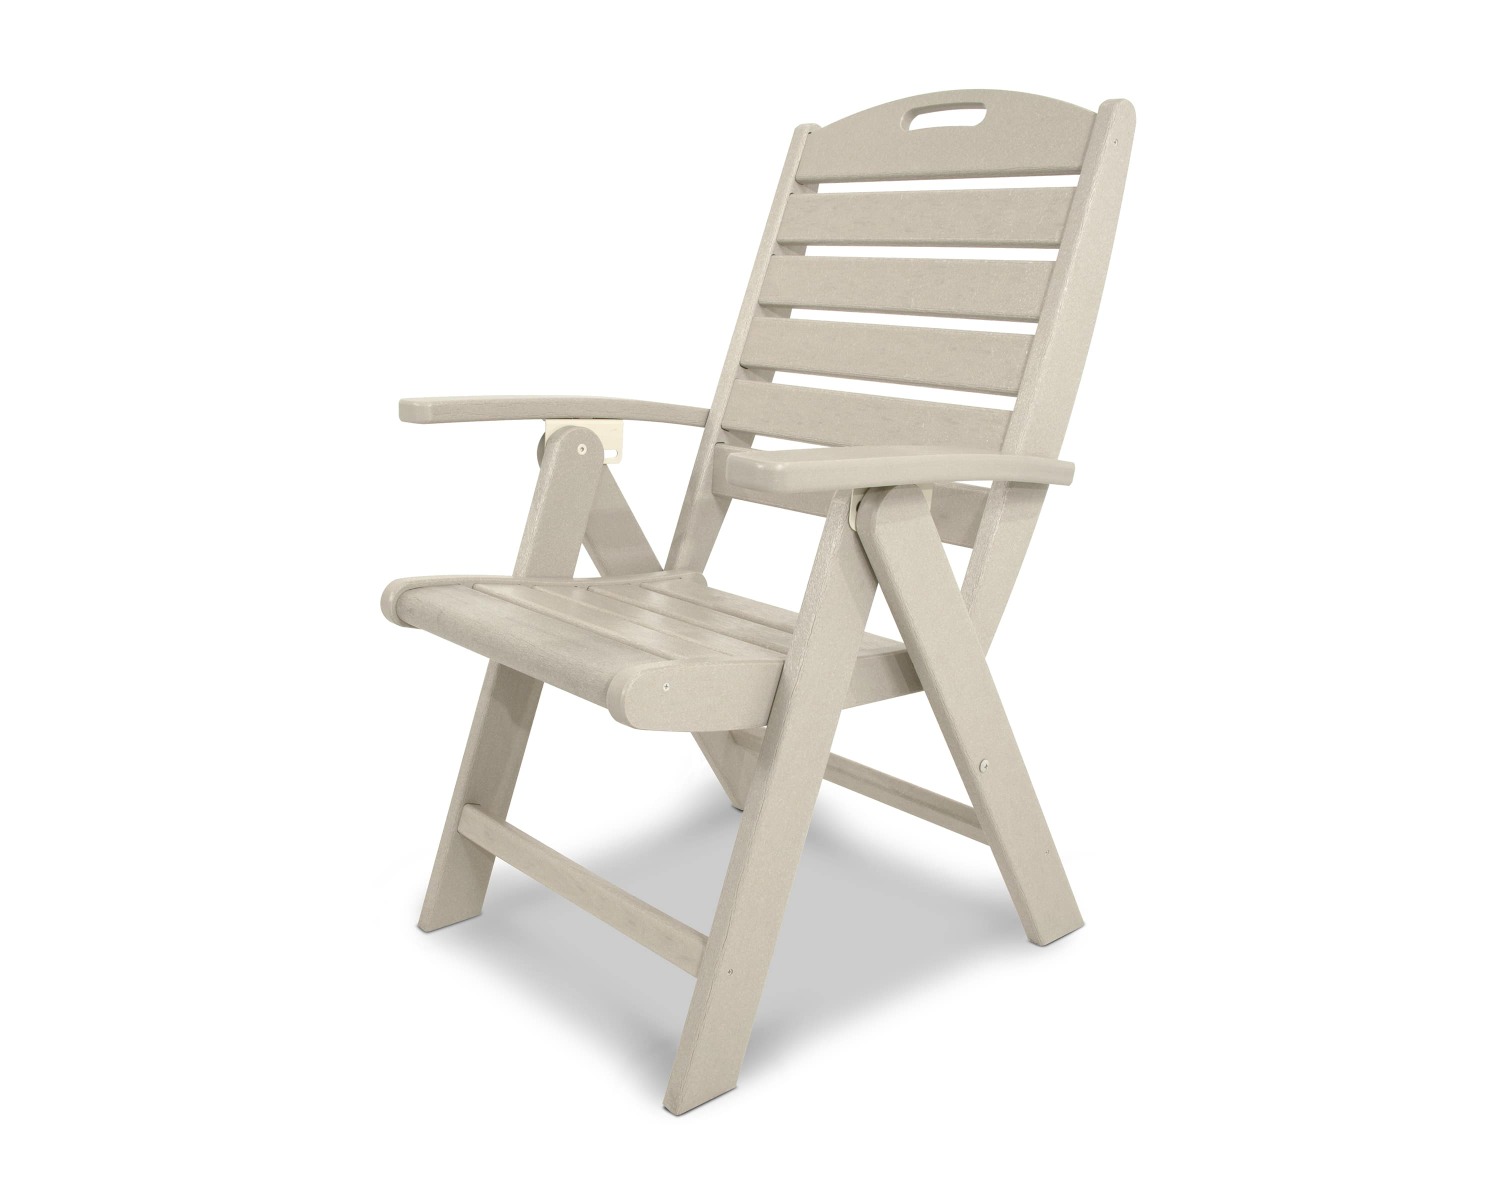 Surf City Lounge Chair in Textured Silver / Tree House